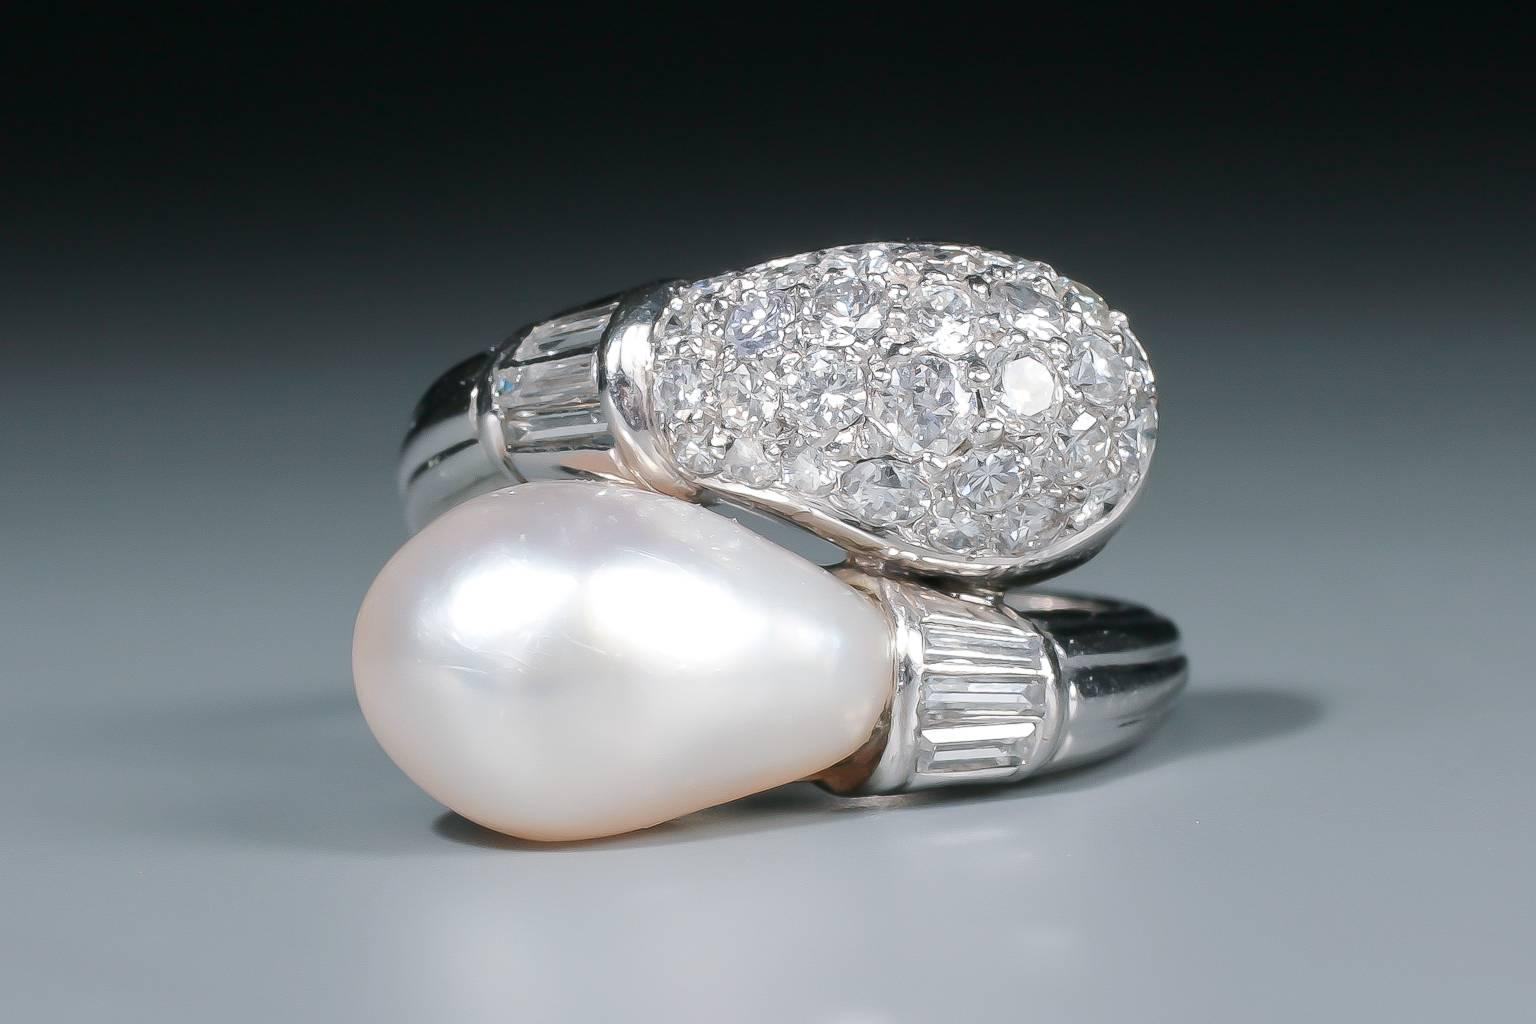 An unusual and elegant Art Deco natural pearl and diamond ring of crossover design, composed of a large drop shaped natural pearl and a diamond pavé-set drop shaped dome, flanked by baguette cut diamonds, mounted in platinum.
The pearl is